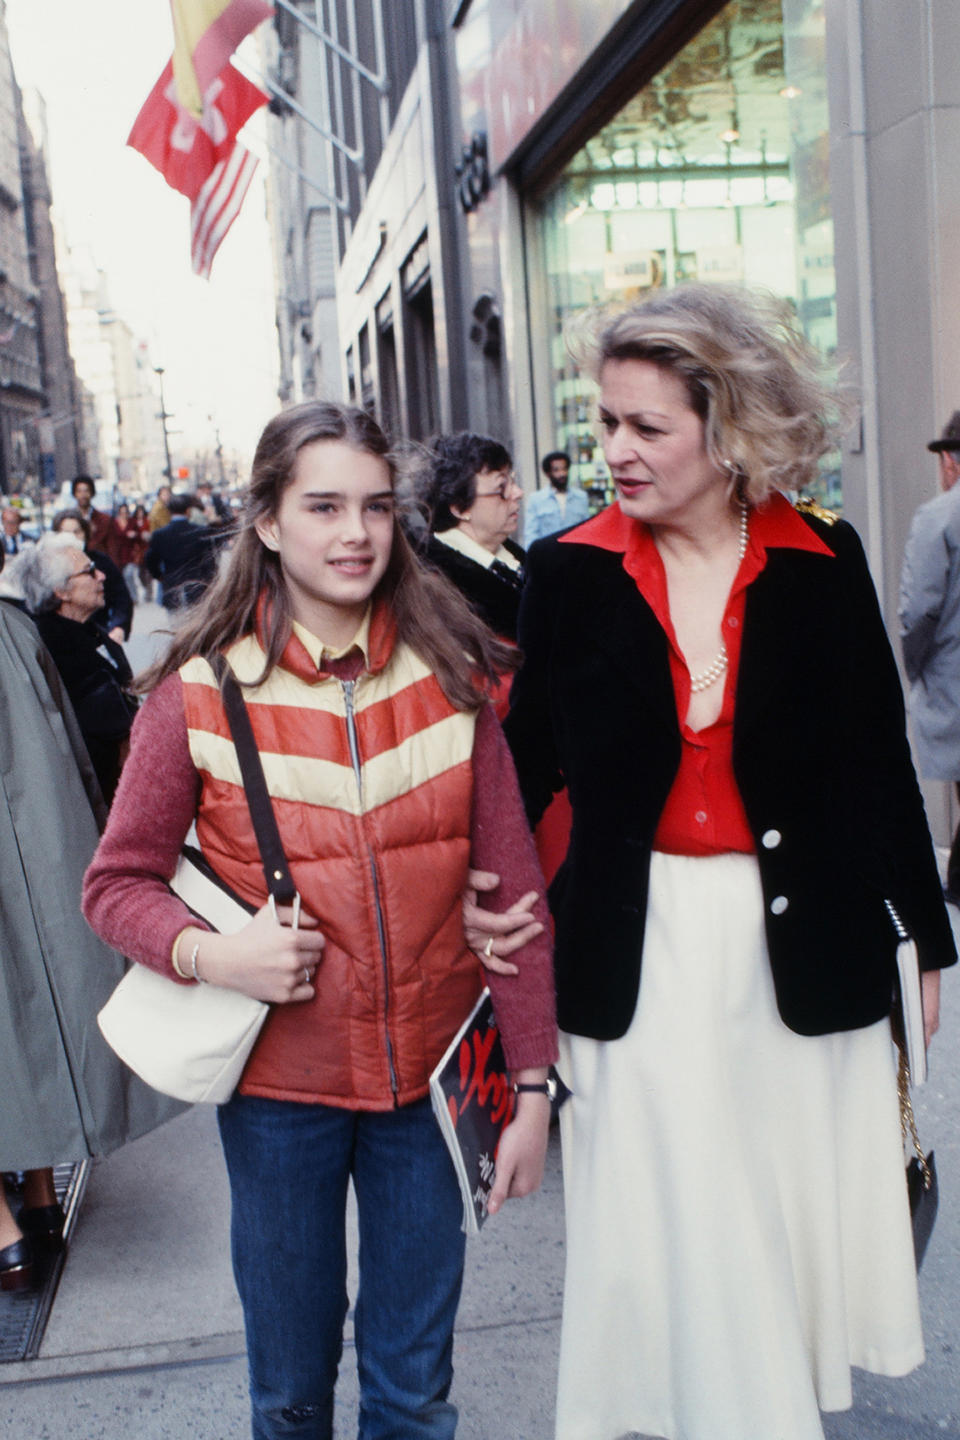 Brooke Shields and her mother (and manager) Teri Shields (1933 - 2012) walk together, New York, New York, 1978